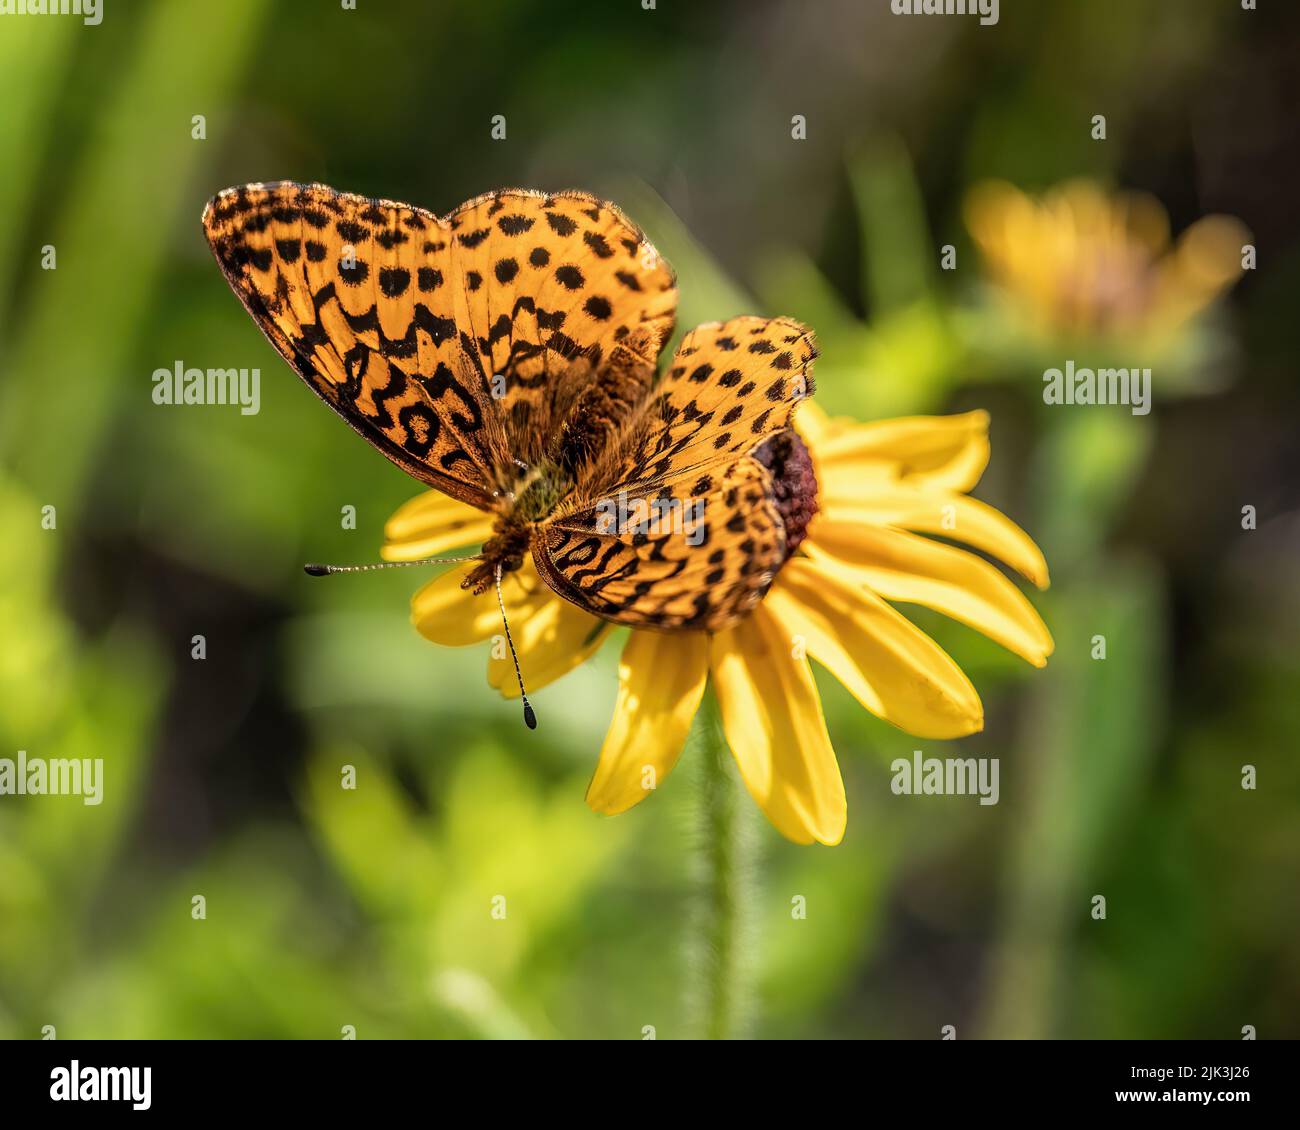 Meadow fritillary butterfly on a rudbeckia, aka black-eyed susan wildflower at St. Croix State Park, Hinckley, Minnesota USA. Stock Photo